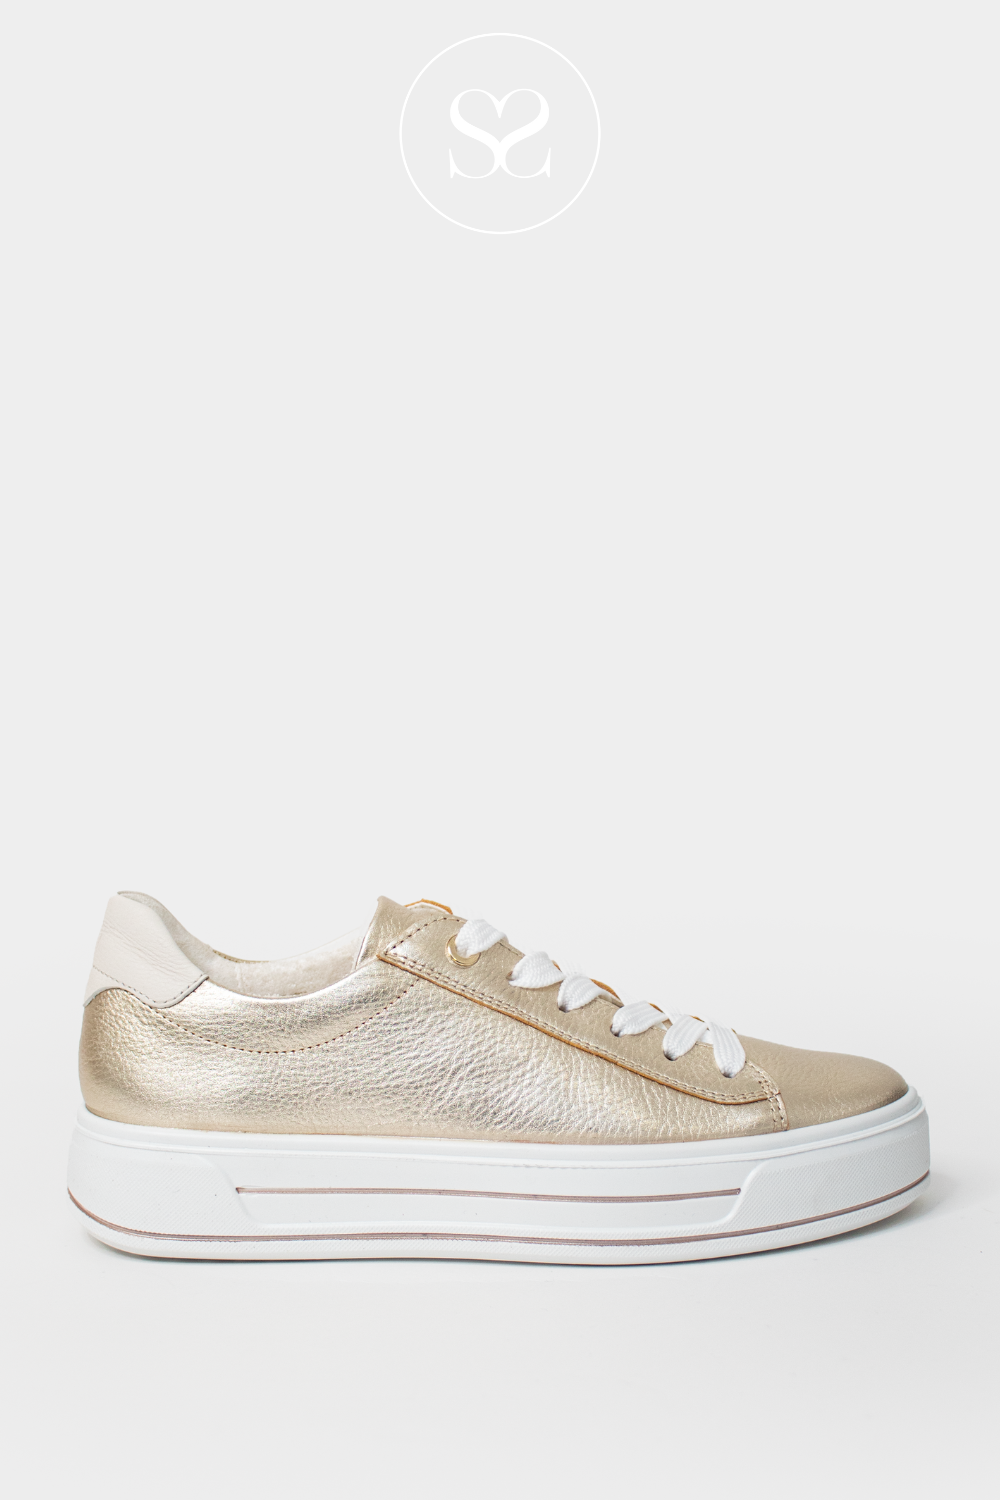 ARA 12-23002 GOLD LEATHER NEAT FLATFORM TRAINERS WITH WHITE SOLE AND LACES